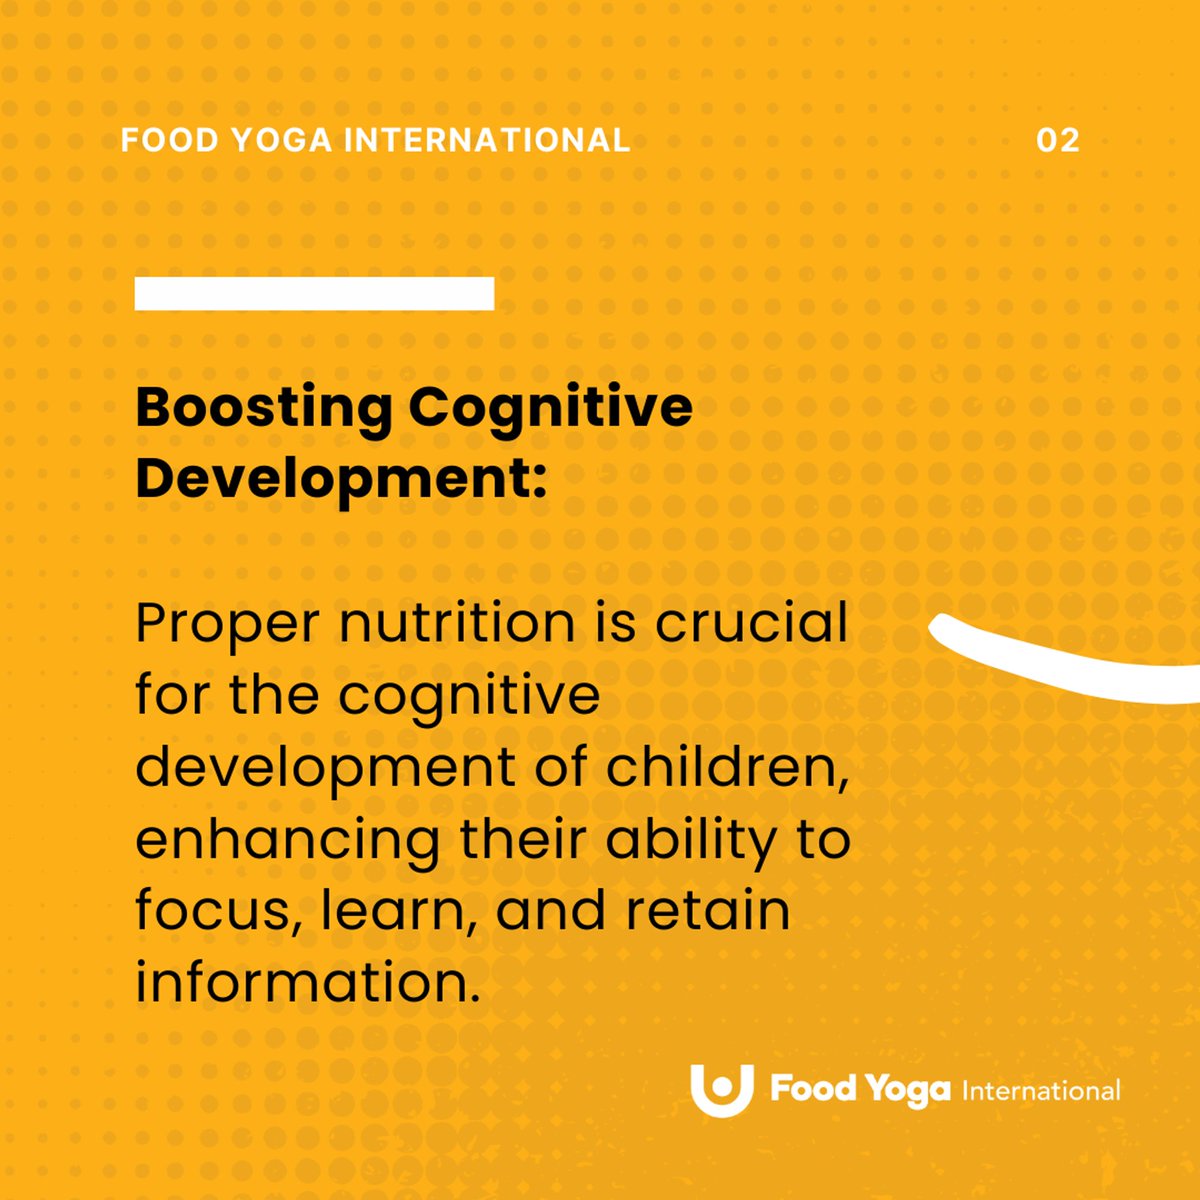 ✅ Boosting Cognitive Development

#donation #donate #charity #charities #foodyogainternational #foodforlifeglobal #Cryptocurency #bitcoindonation #compassion #HumanRights